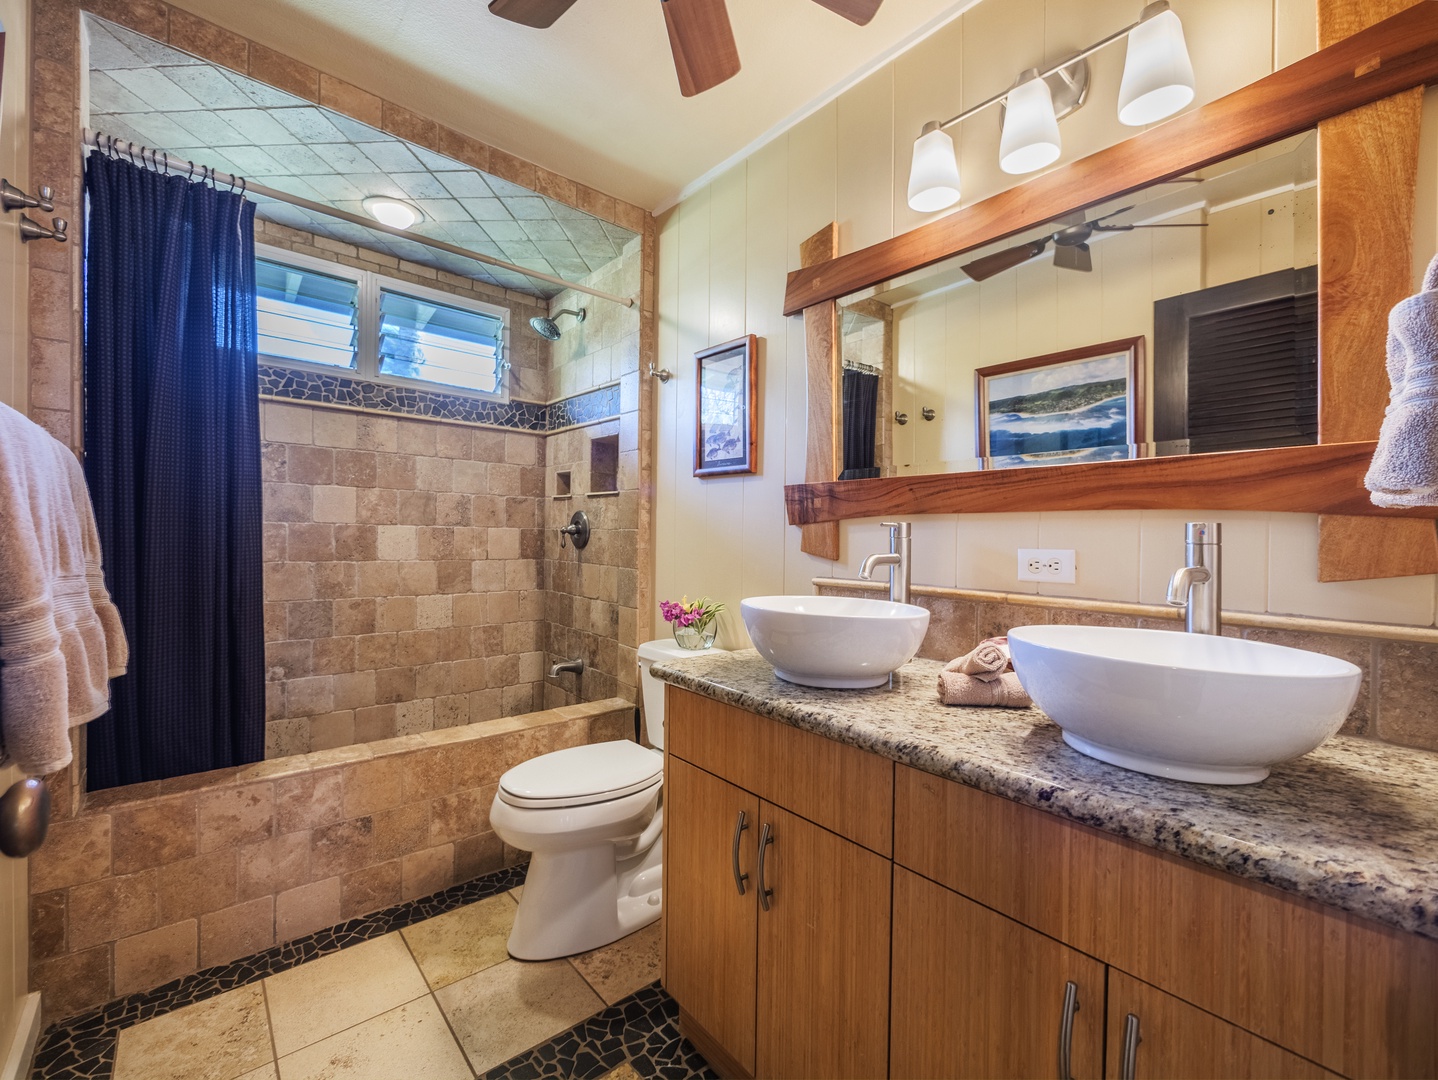 Haleiwa Vacation Rentals, Sunset Point Hawaiian Beachfront** - Ensuite bathroom with dual sinks and a walk-in shower.